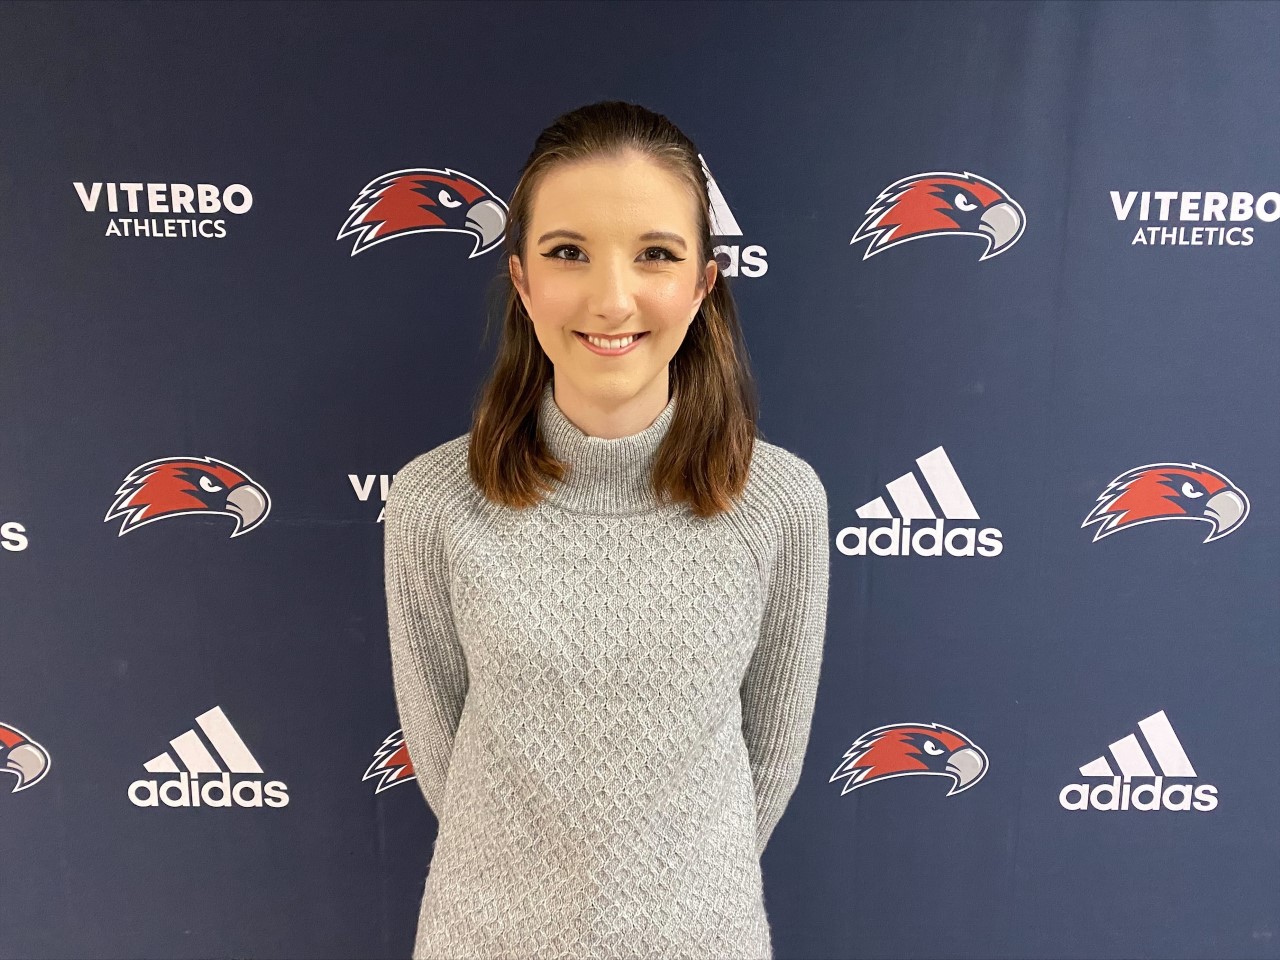 Danaher hired as first Esports coach in Viterbo history